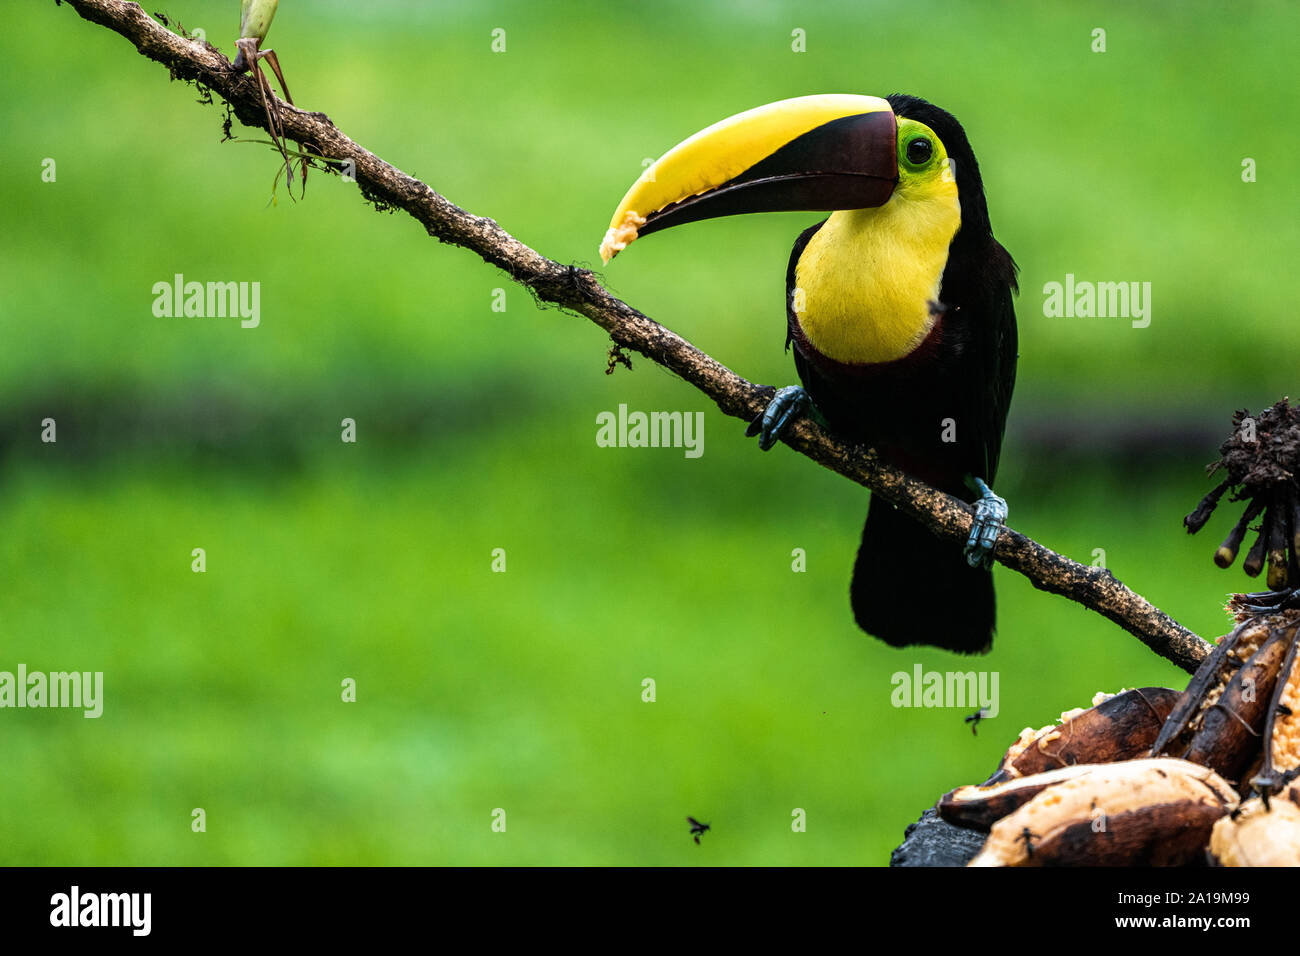 The chestnut-mandibled toucan or Swainson’s toucan (Ramphastos ambiguus swainsonii) in tropical rainforest. This bird is a subspecies of the yellow-th Stock Photo